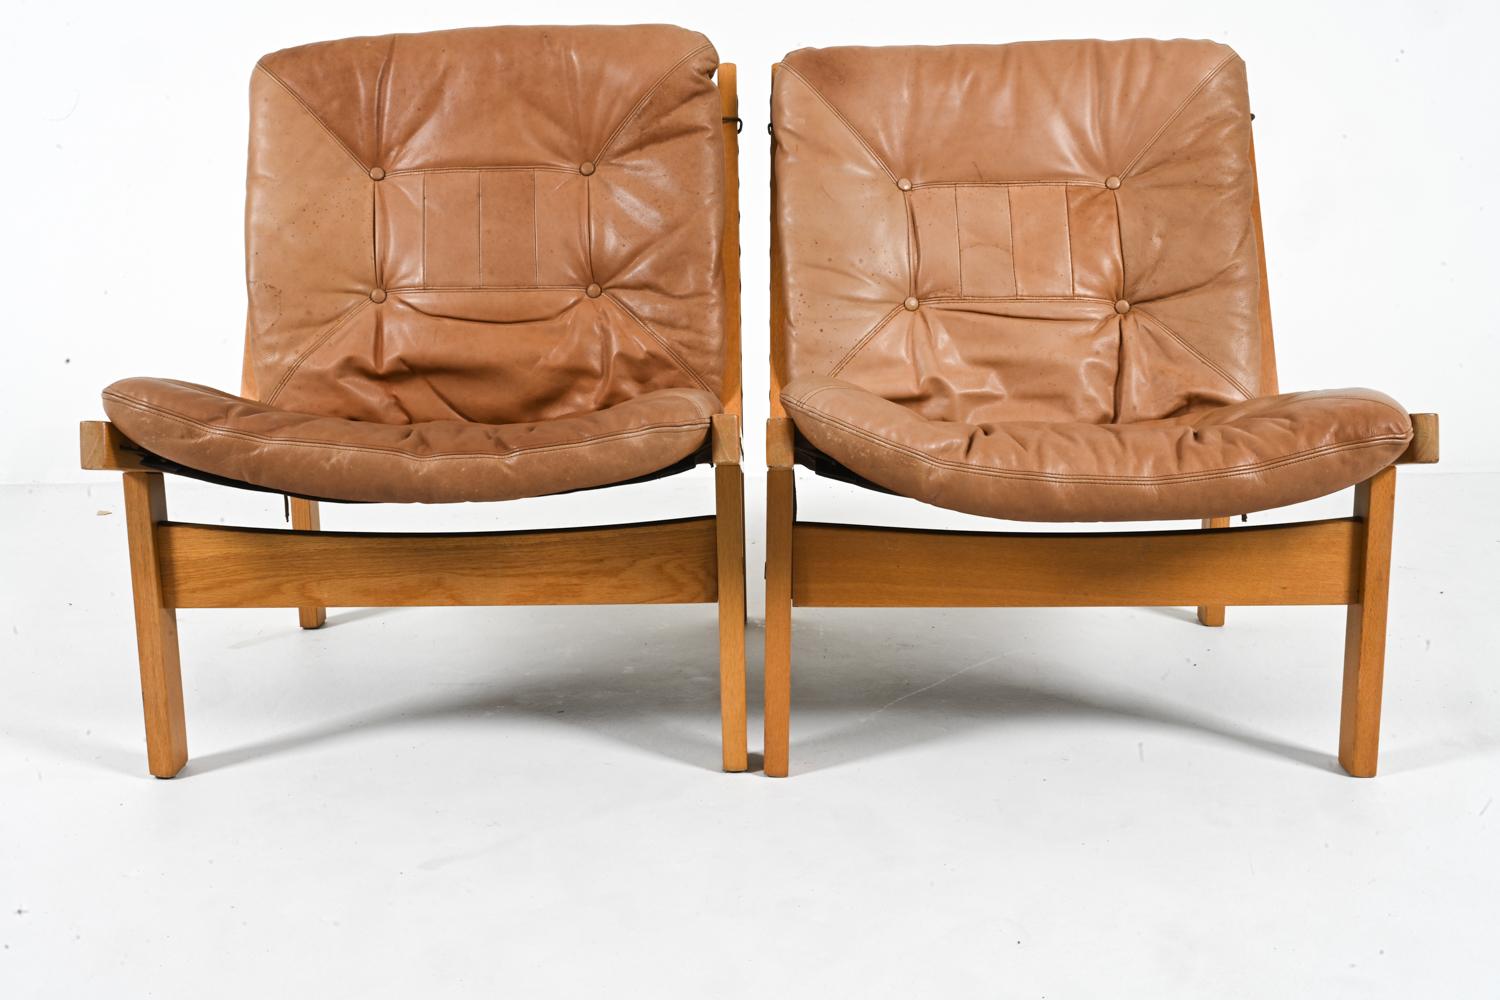 Pair of Oak 'Hunter' Lounge Chairs by Torbjørn Afdal for Bruksbo, Norway, 1960's In Good Condition For Sale In Norwalk, CT